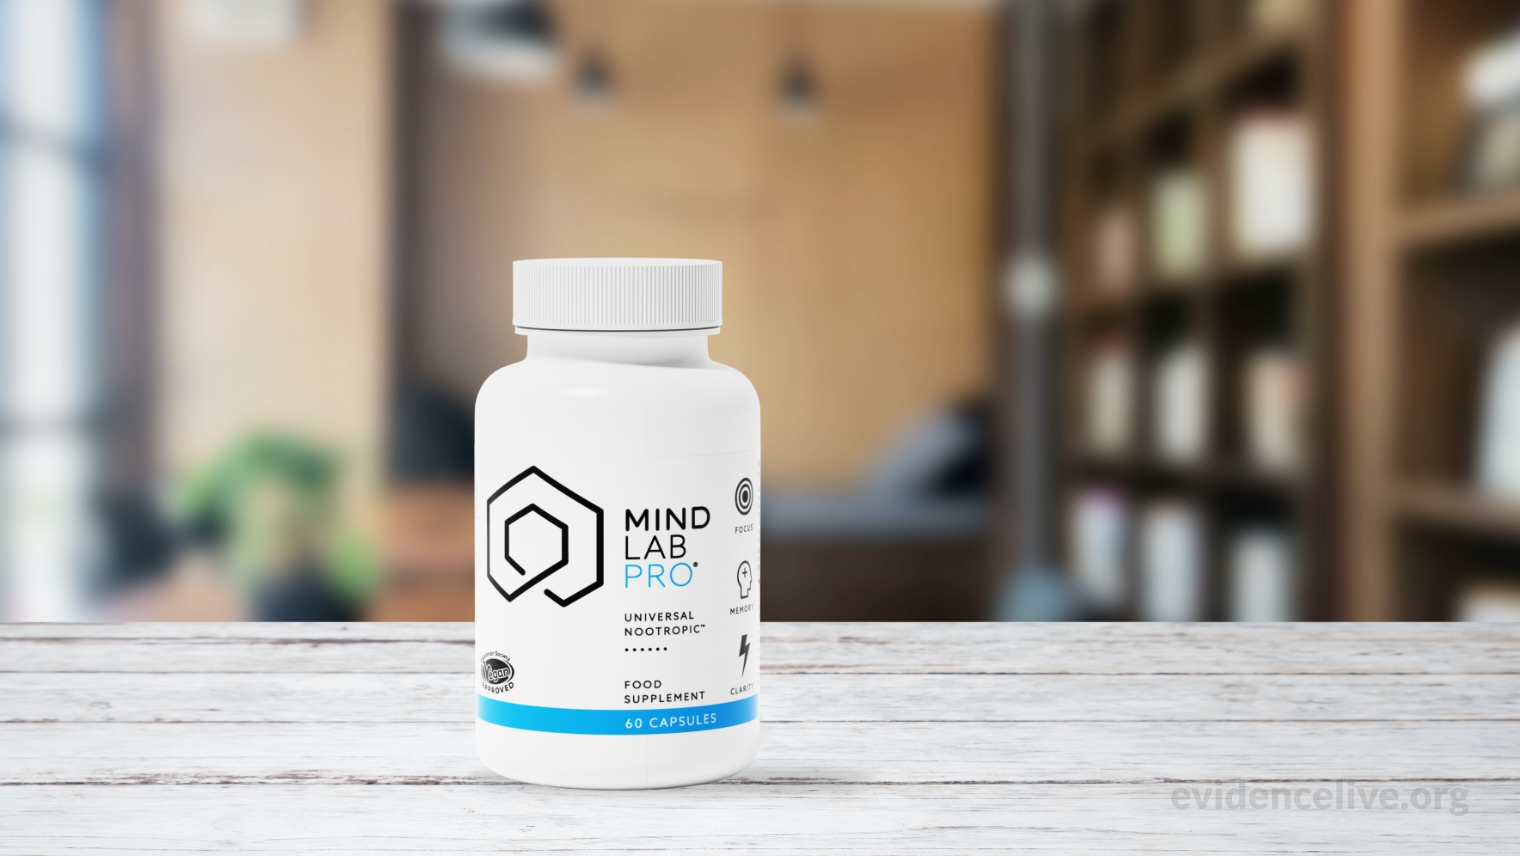 Mind Lab Pro benefits and effects